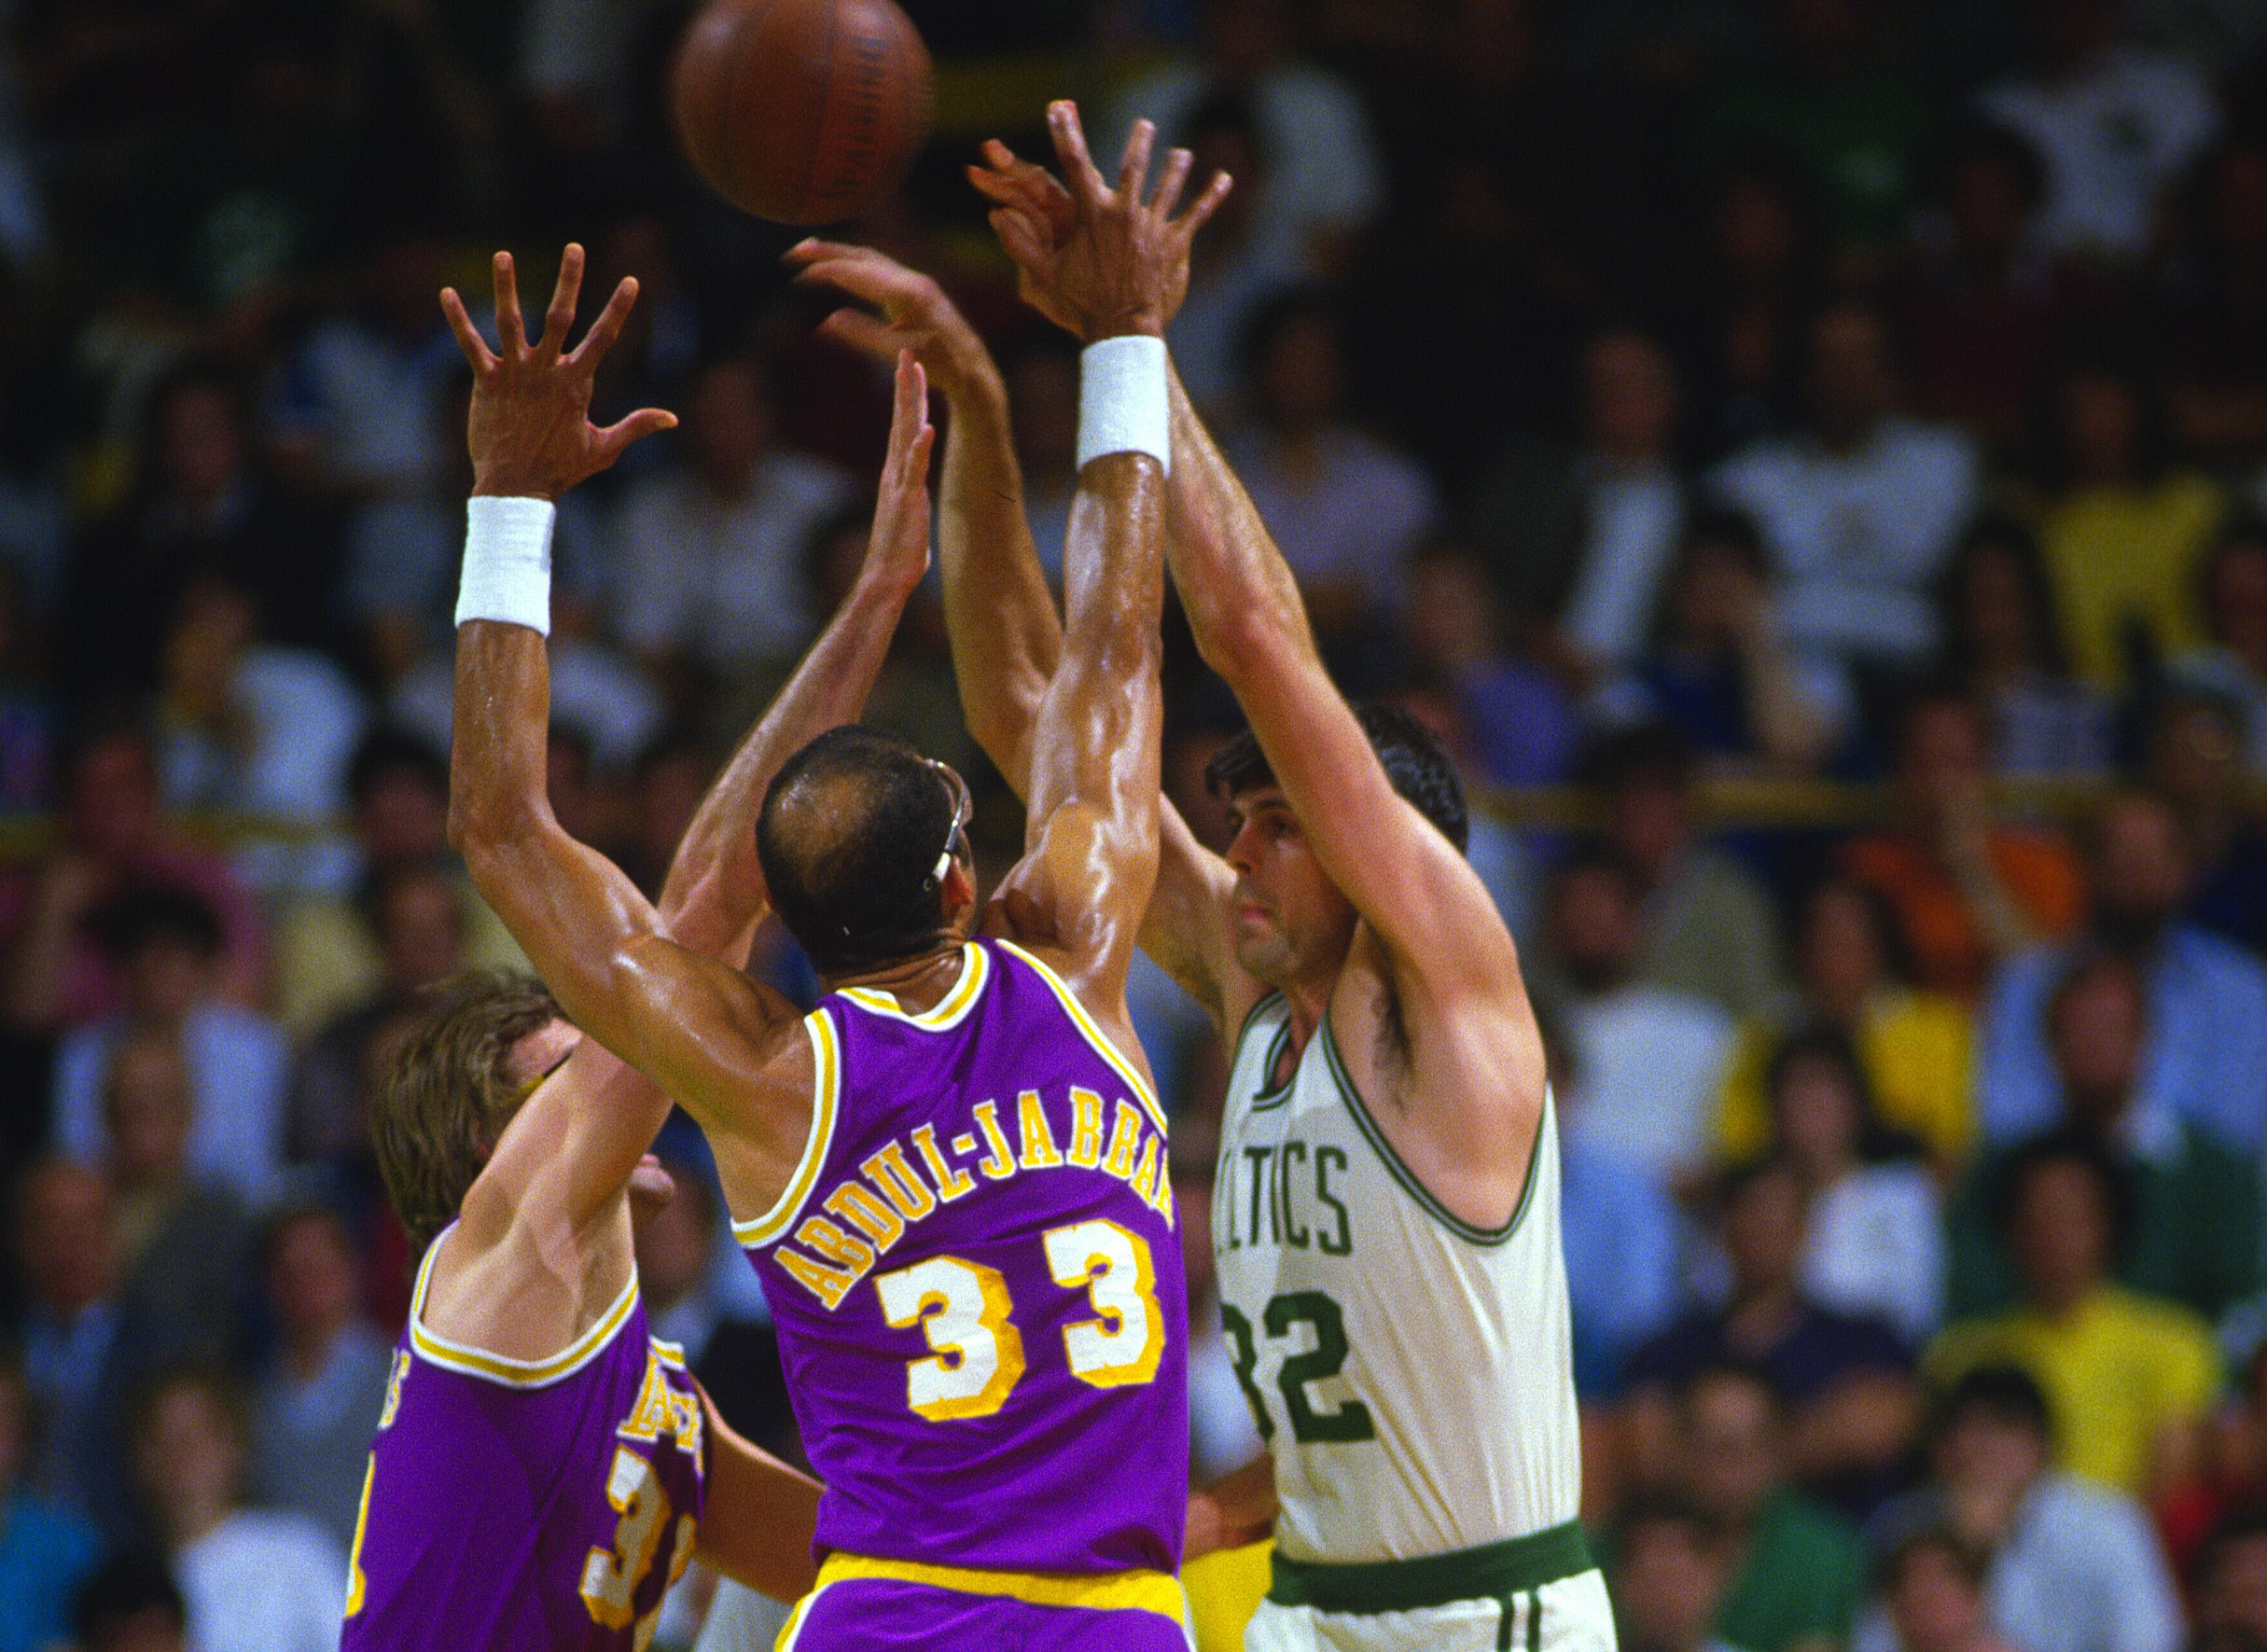 Kareem Abdul-Jabbar of the Los Angeles Lakers guards Kevin McHale of the Boston Celtics.